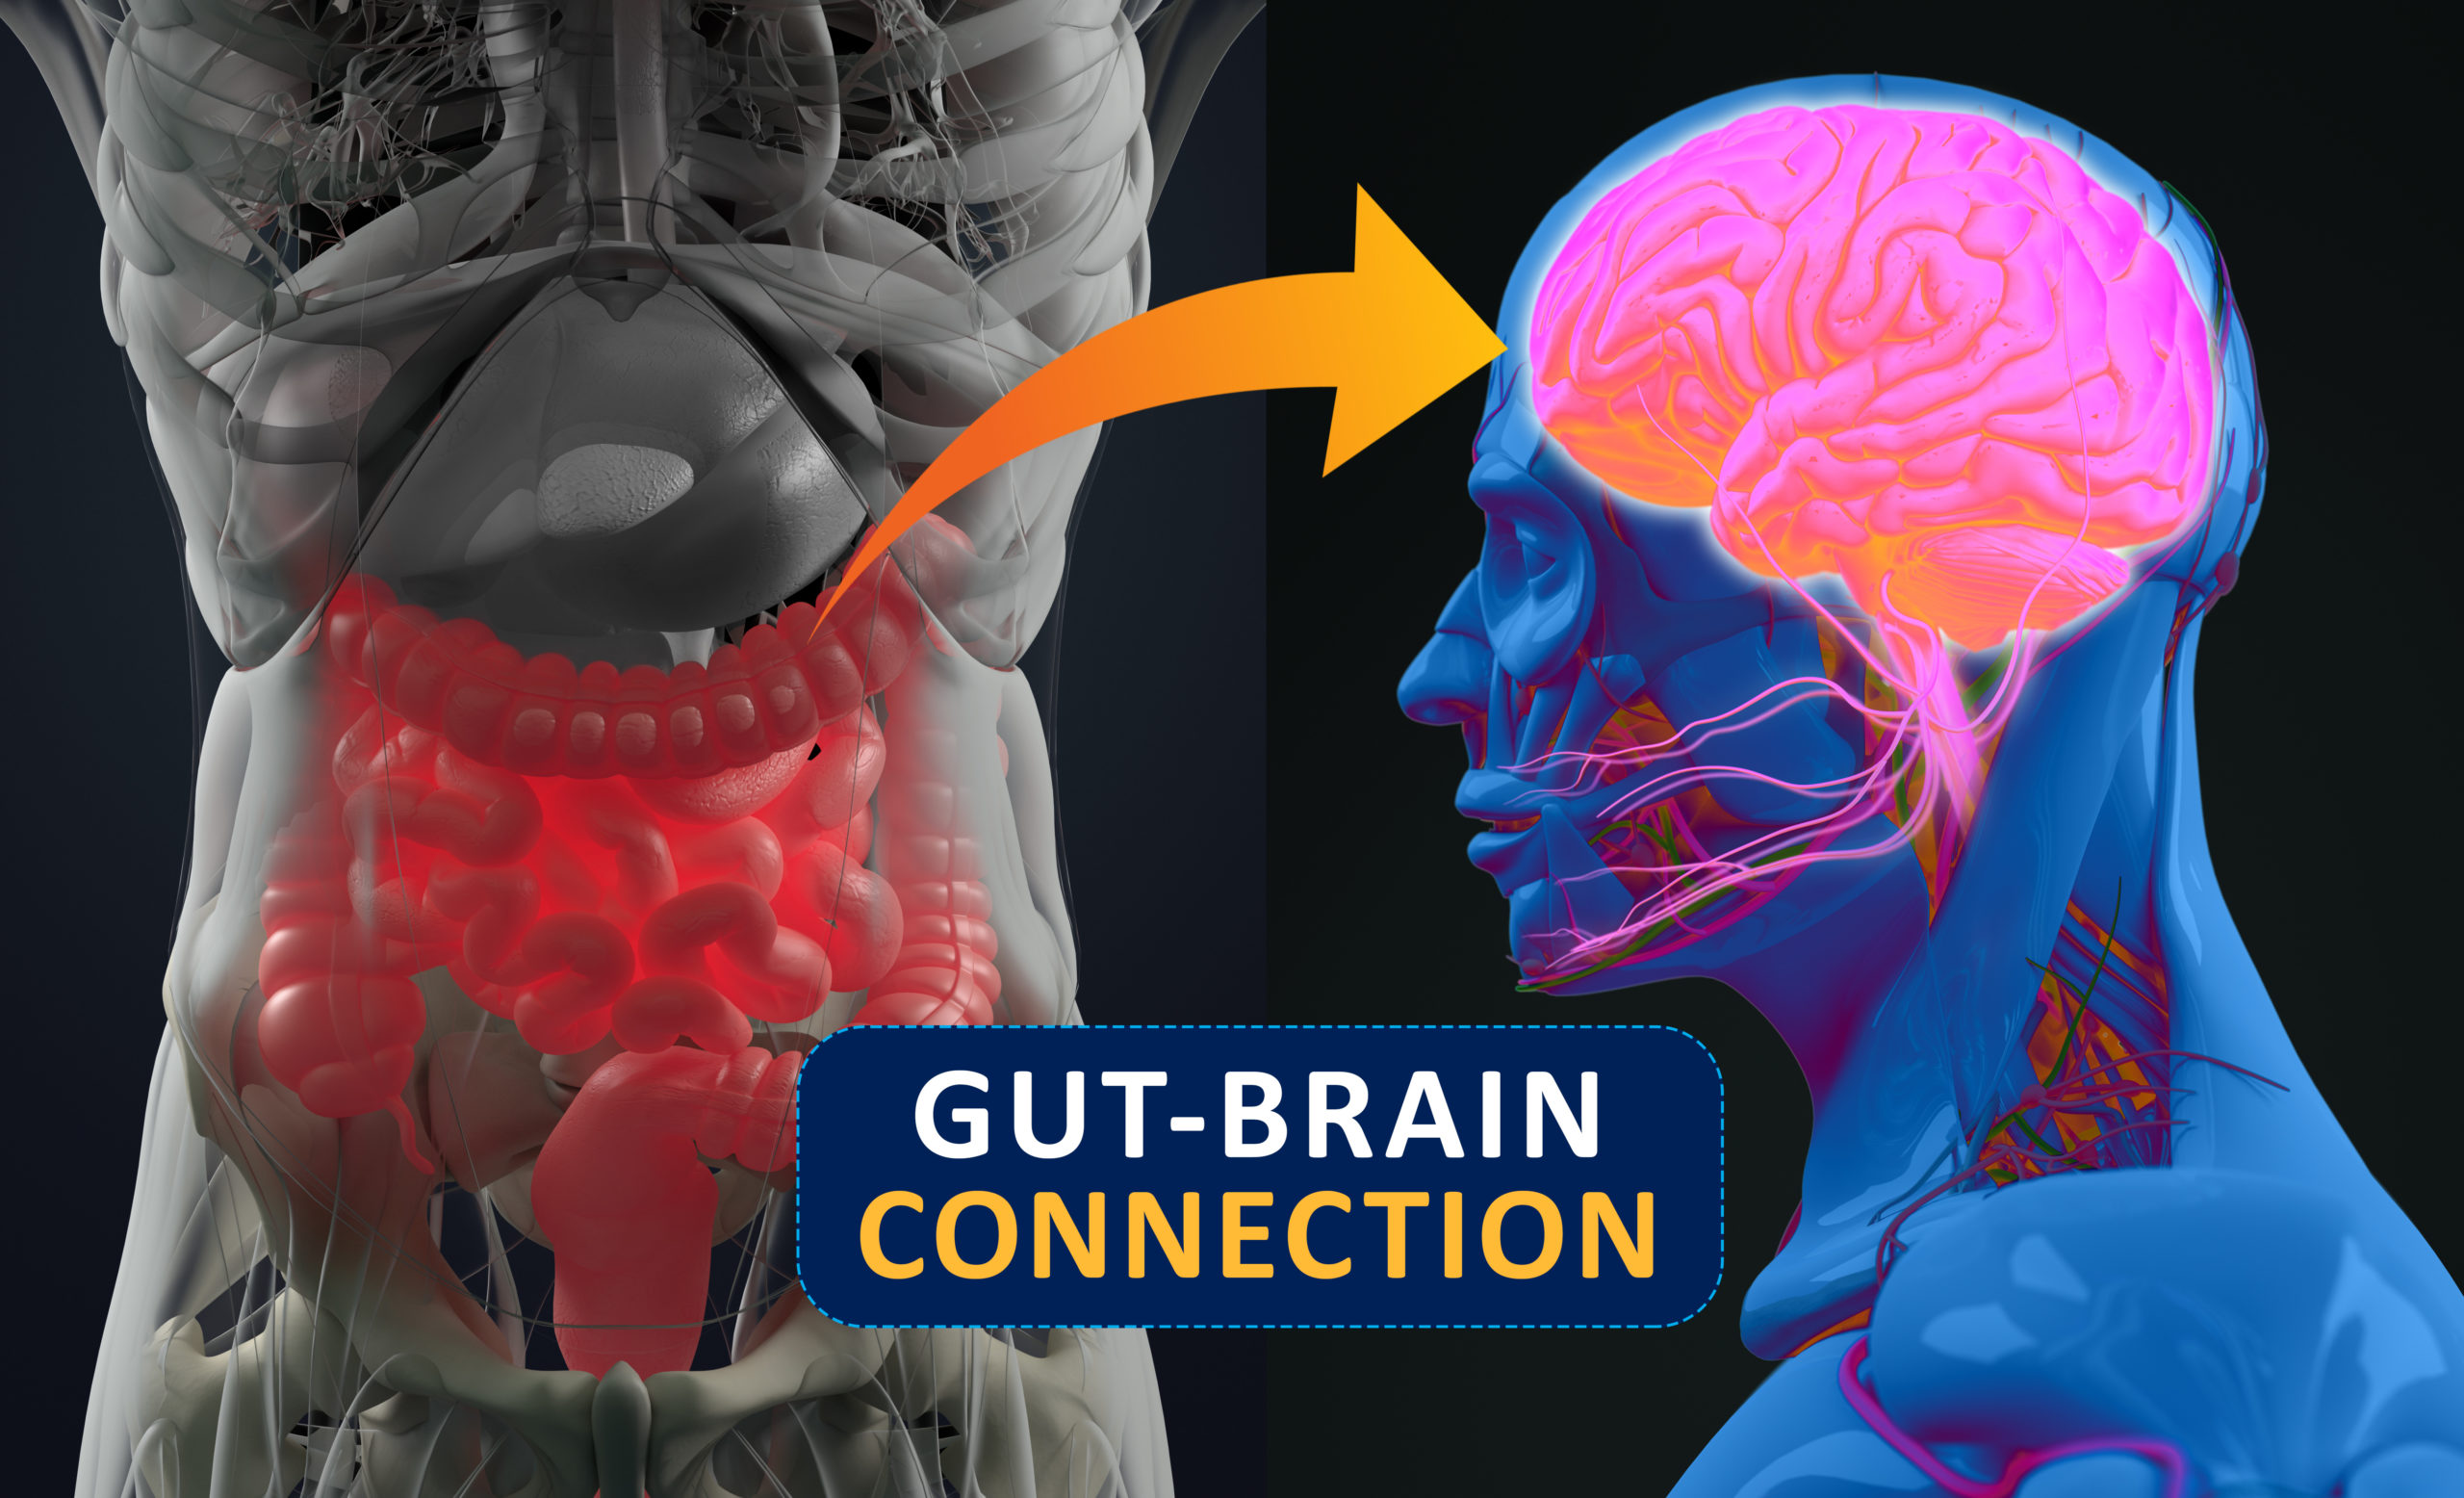 Our gut microbiome and brain: A closer look at their connection